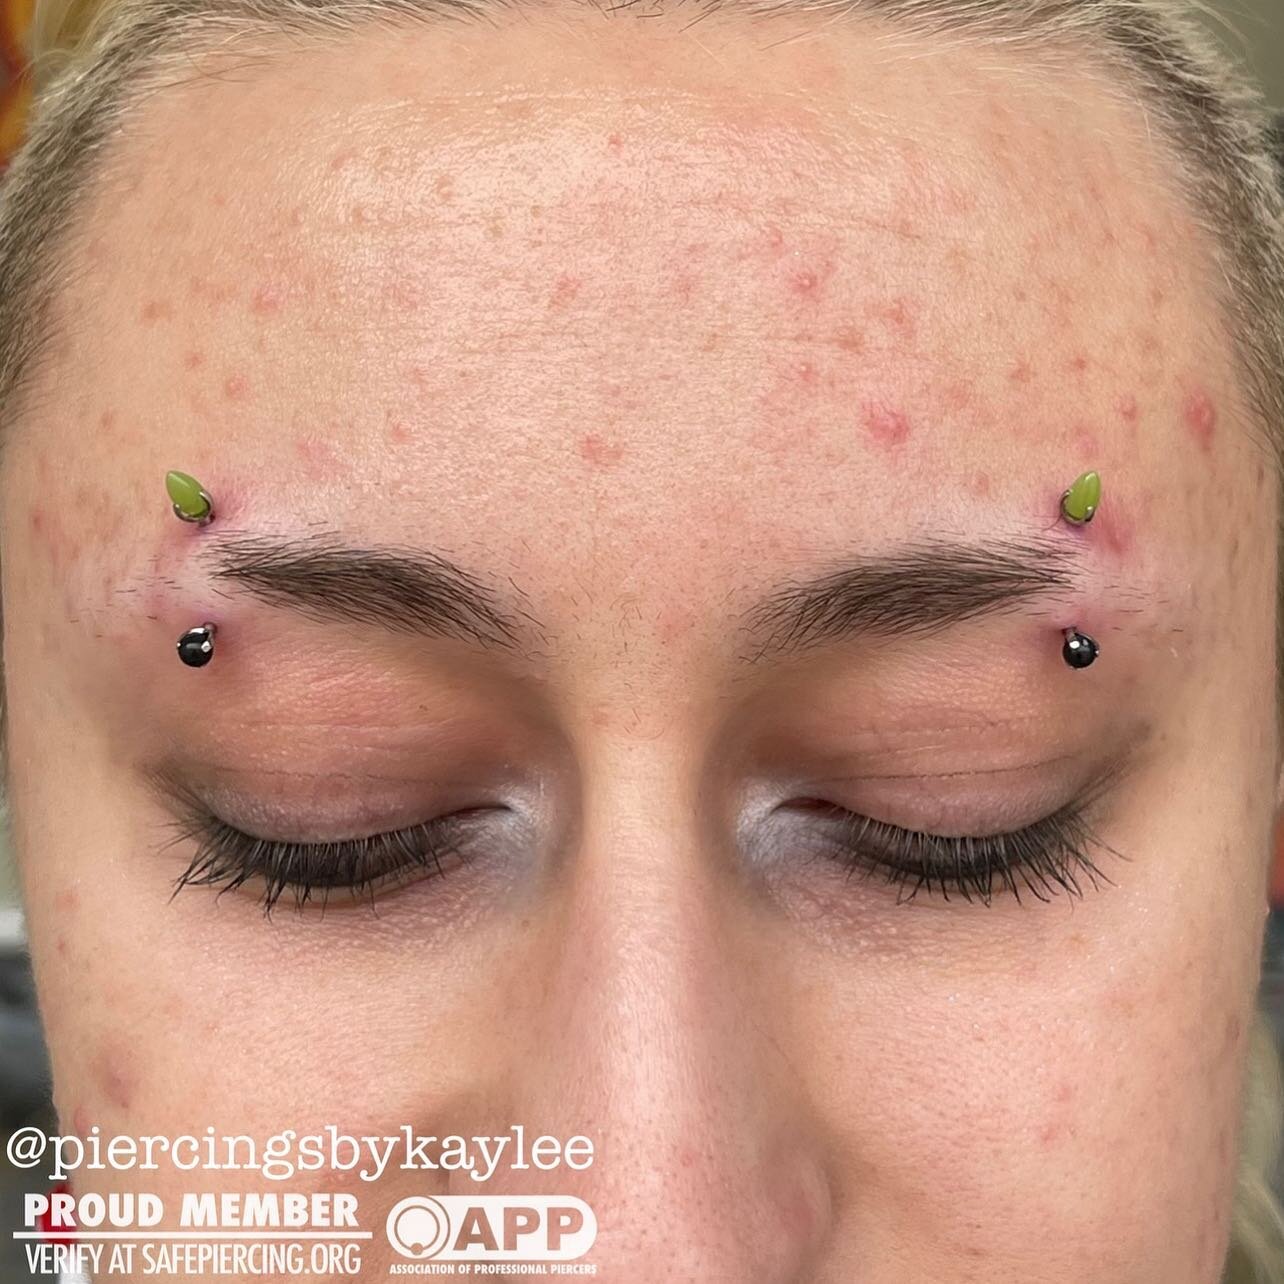 Had a great time getting to pierce this set of a paired eyebrow piercings! Jewelry featuring Jade bullet and onyx ends✨ 
.
( healed septum that I also had the pleasure of piercing a while back!)
.
.
.
#eyebrows #pairedeyebrowpiercing #eyebrowpiercing